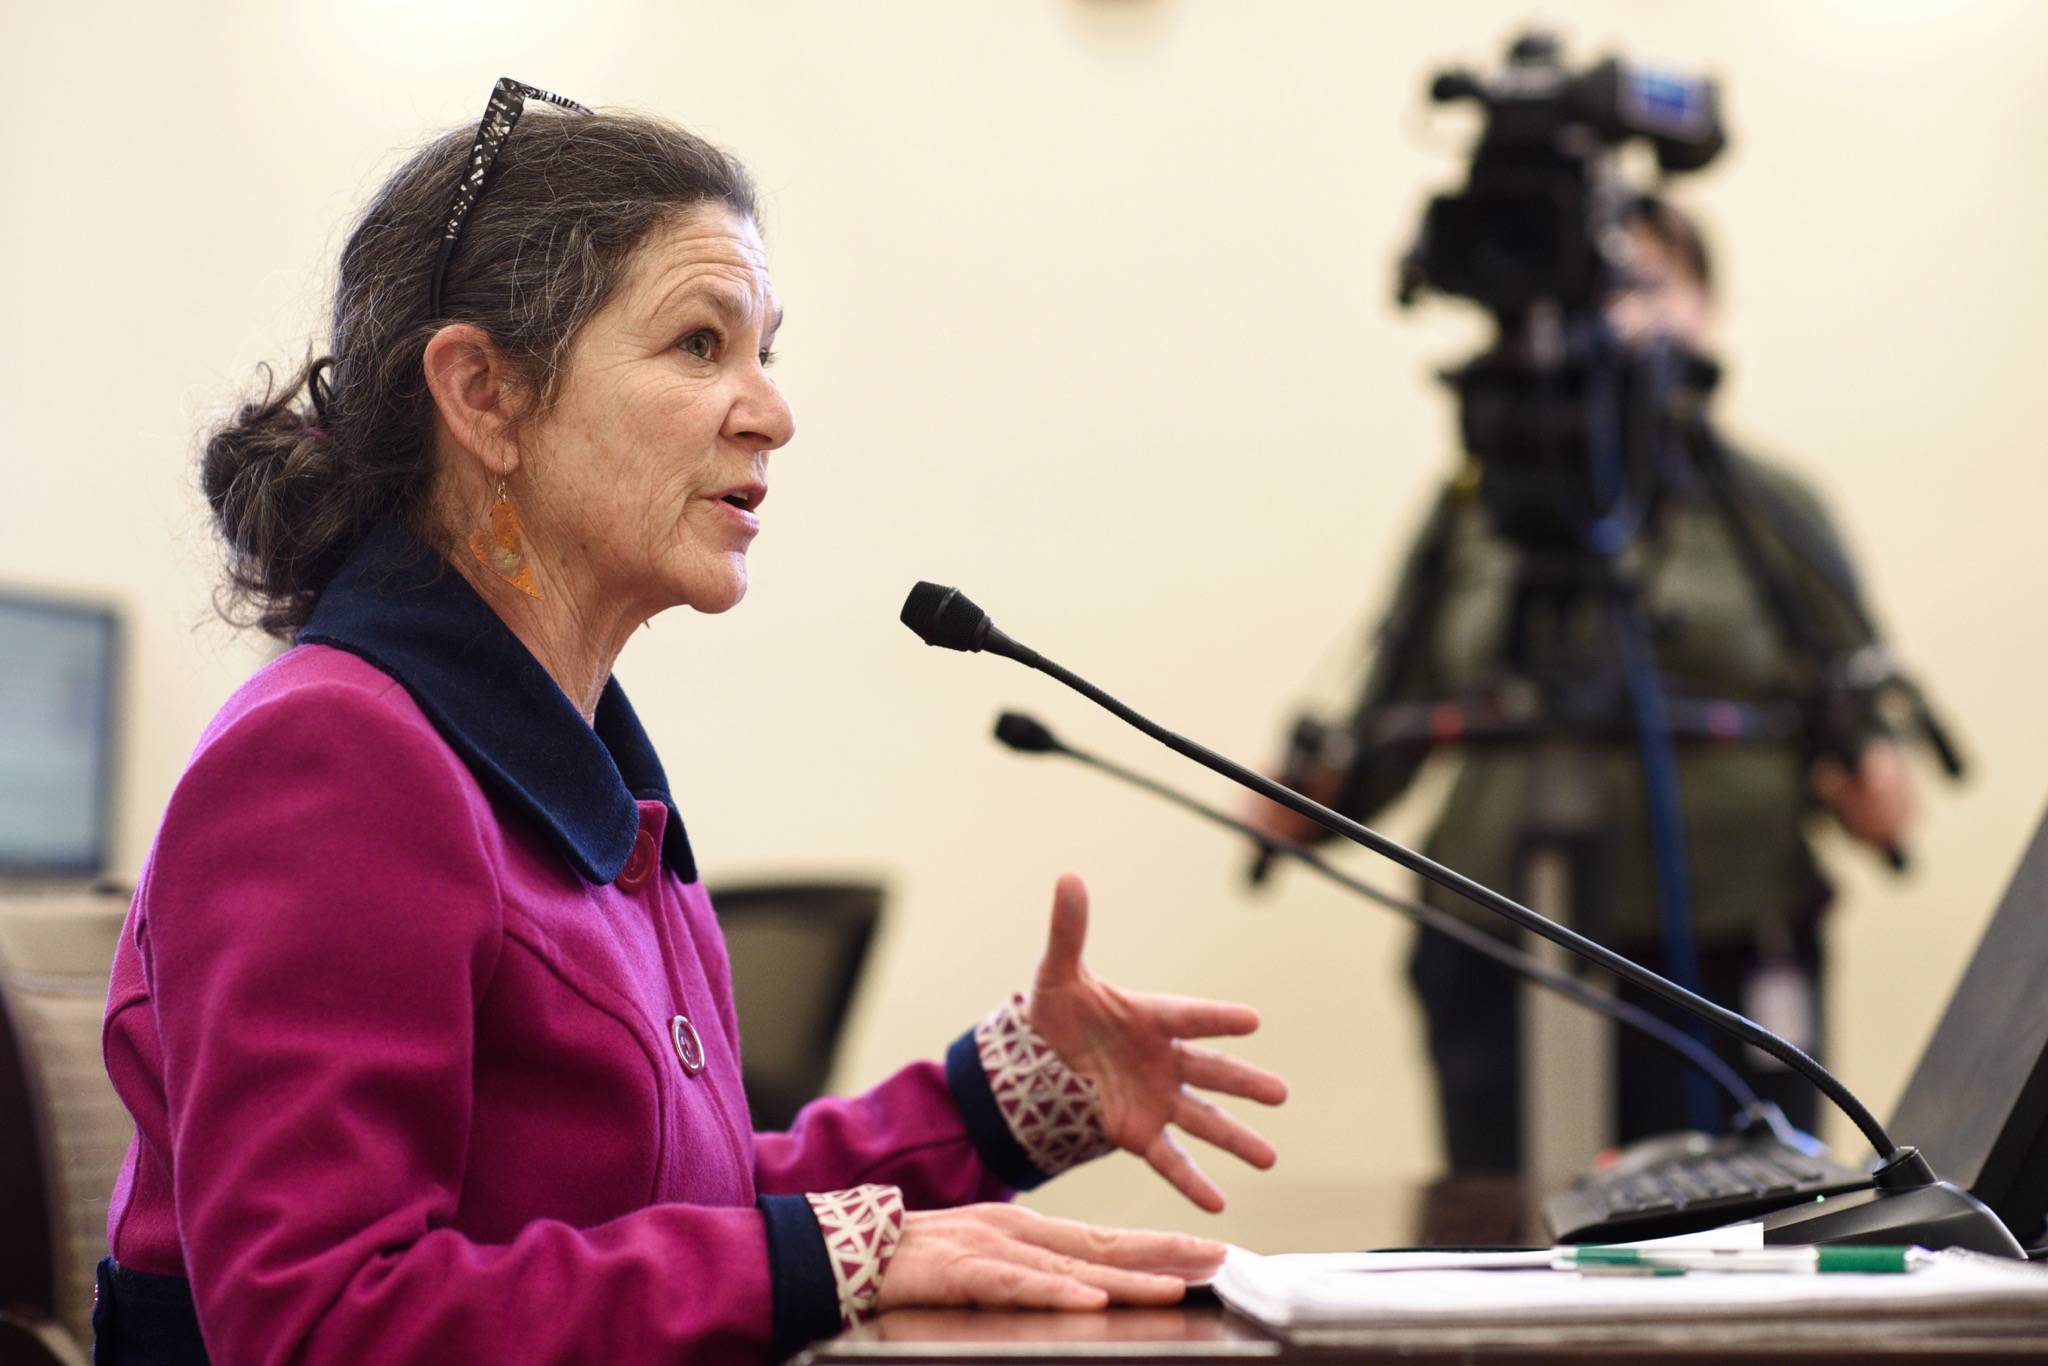 Carmen Lowry, Executive Director at Alaska Network on Domestic Violence and Sexual Assault, speaks to the Senate Judiciary Committee about SB 12, a crime bill, at the Capitol on Monday, March 4, 2019. (Michael Penn | Juneau Empire)